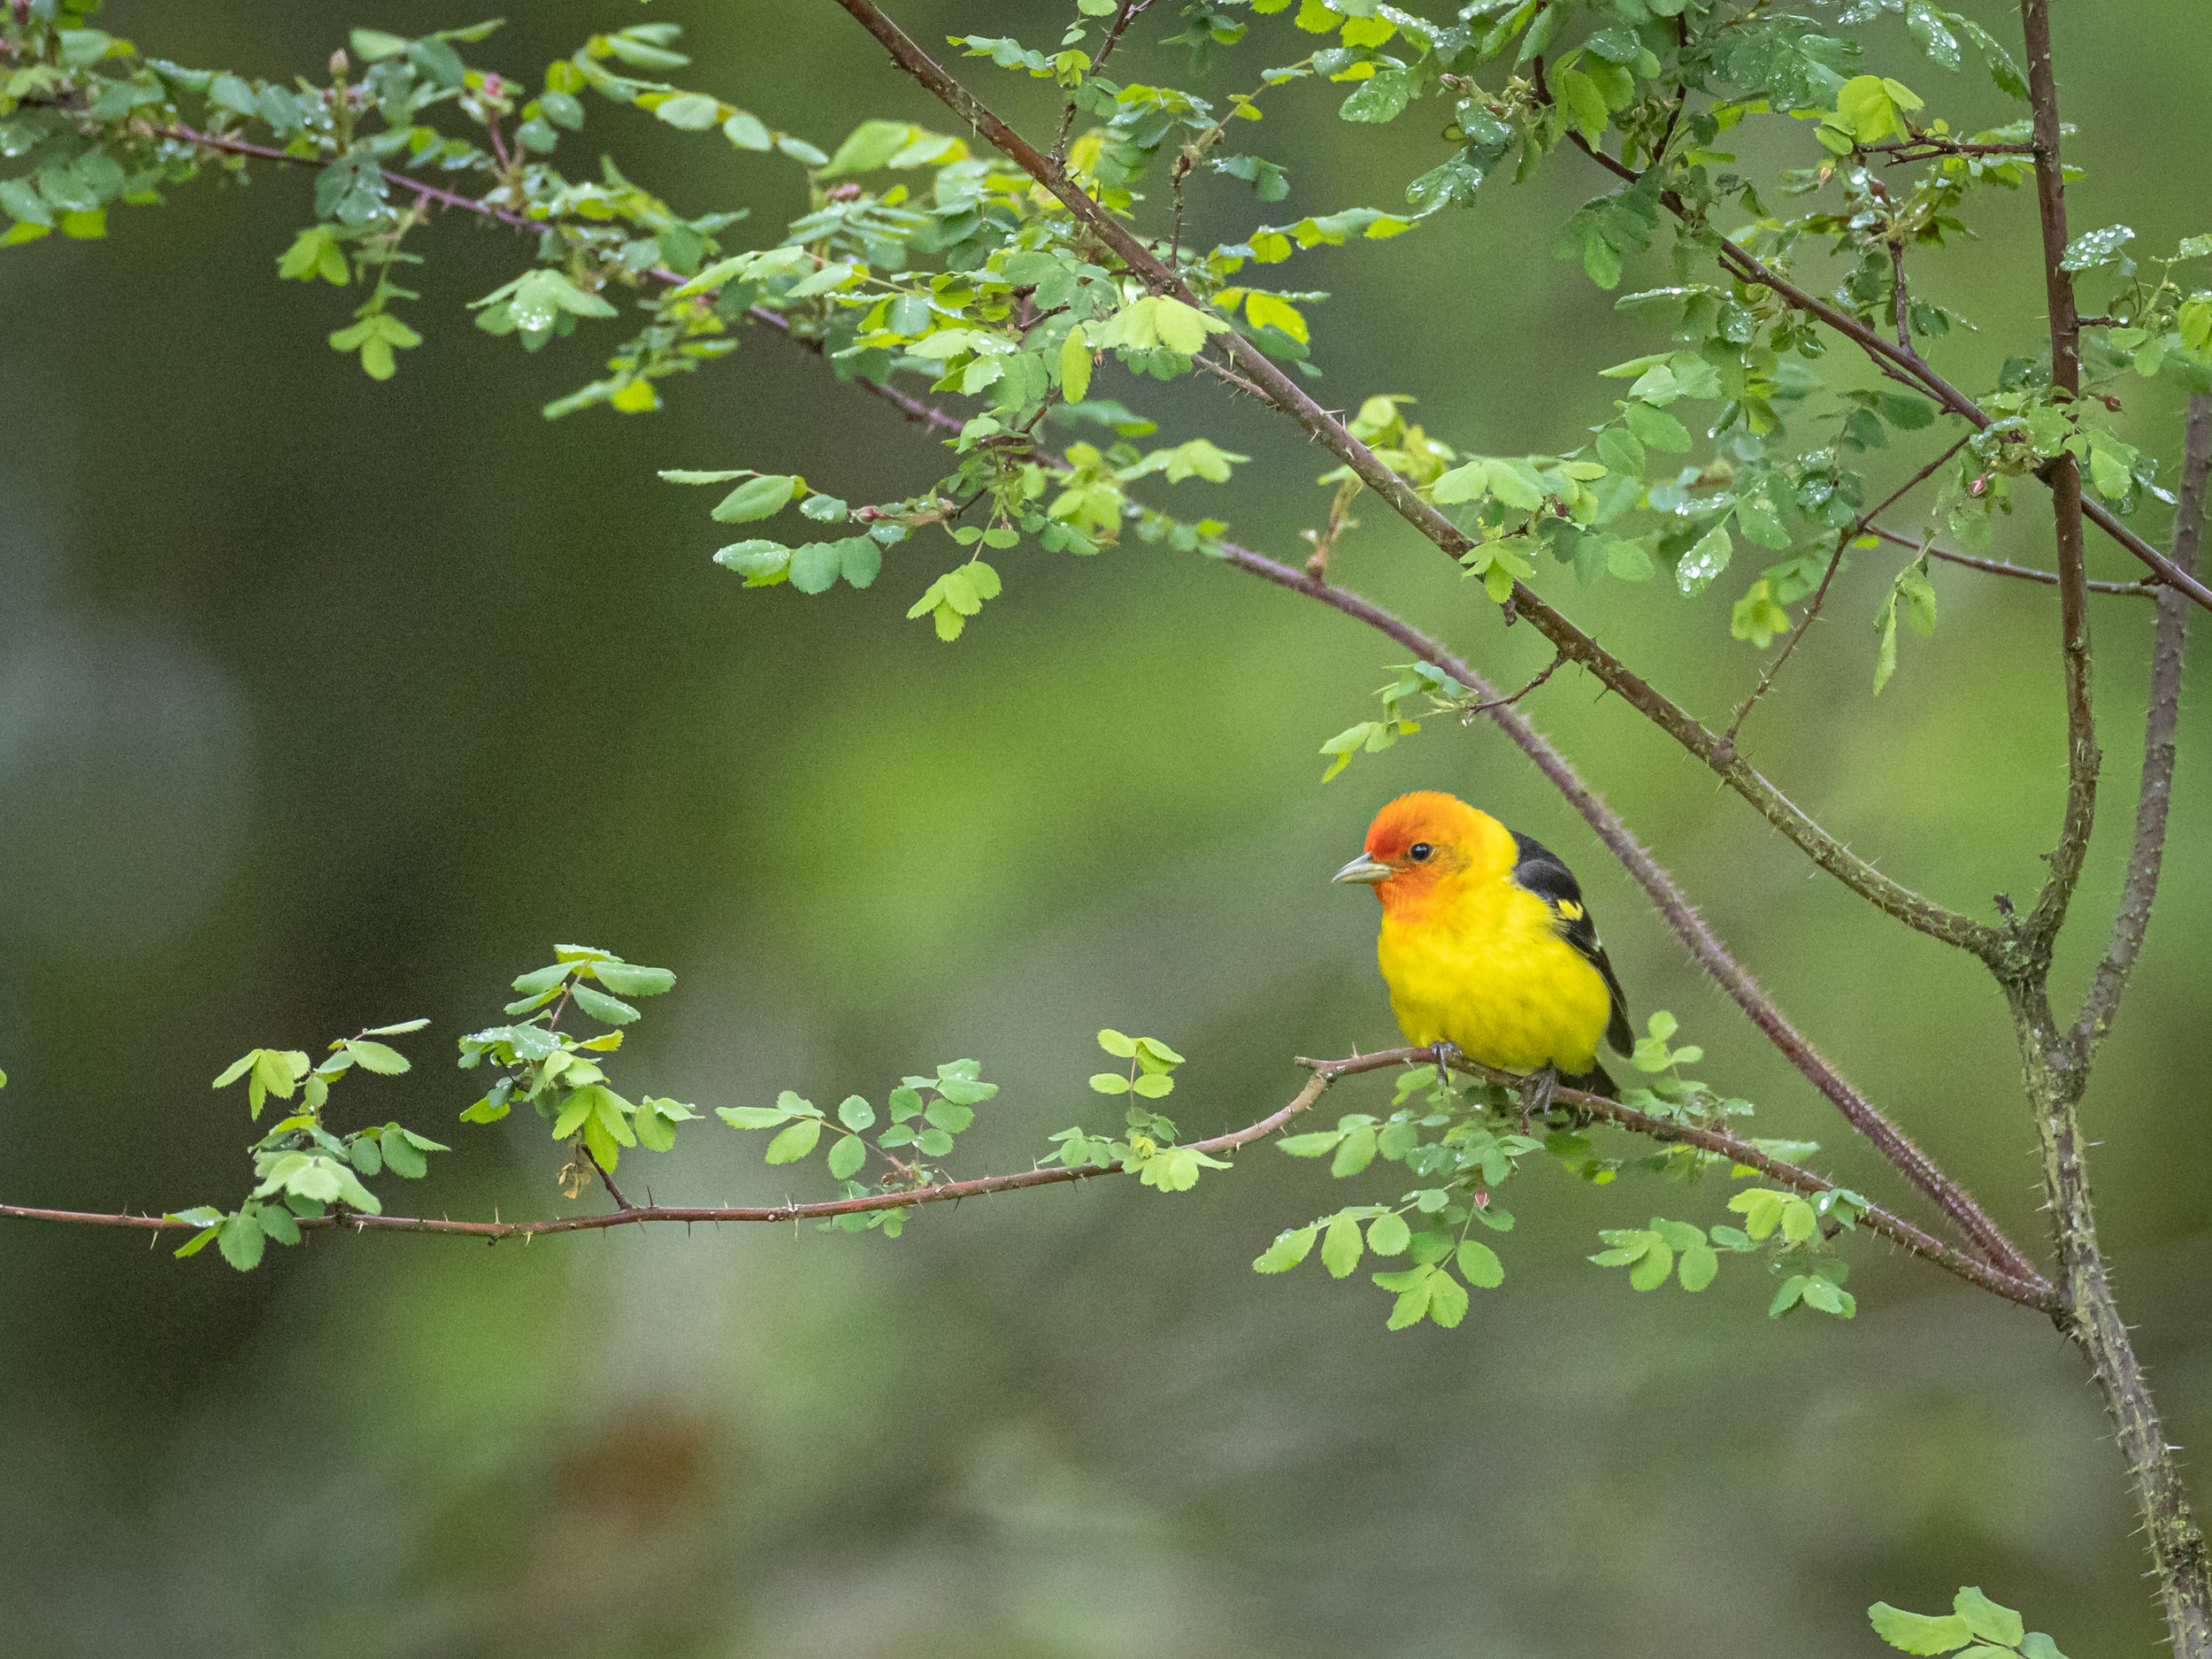 Tanager in the Tree by Ann Kramer